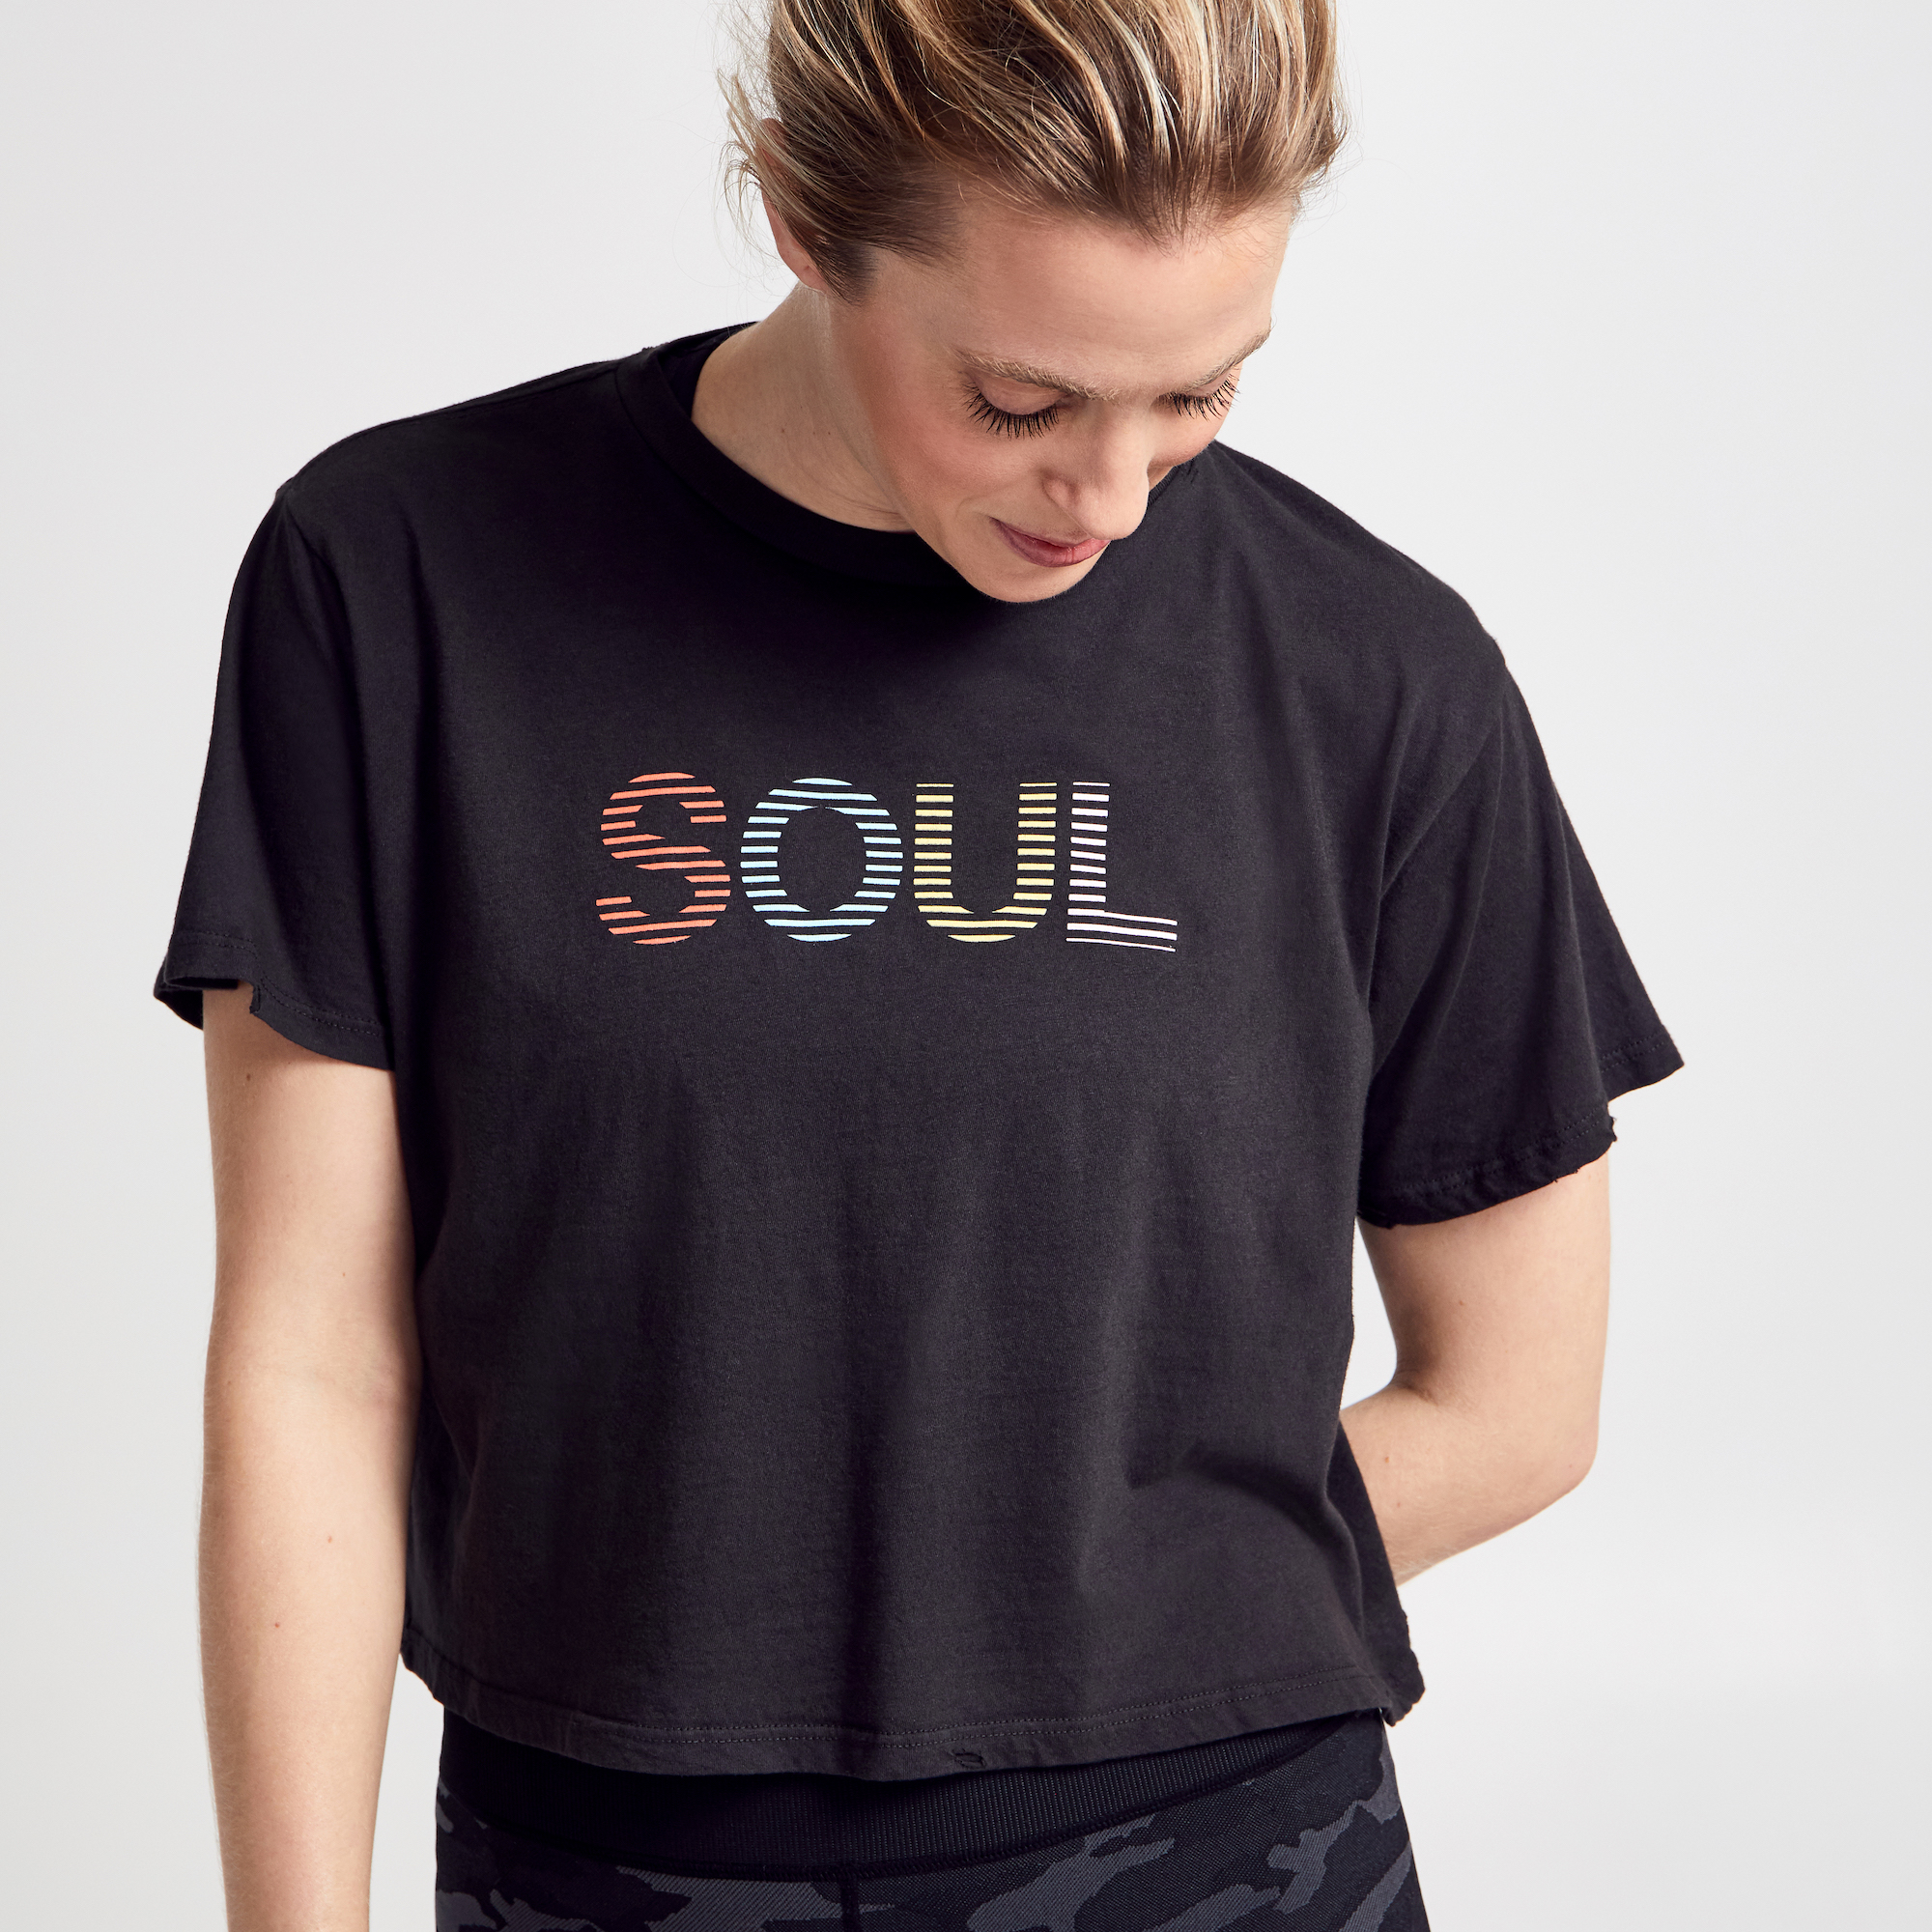 Soul by SoulCycle Short Sleeve Distressed Shirt